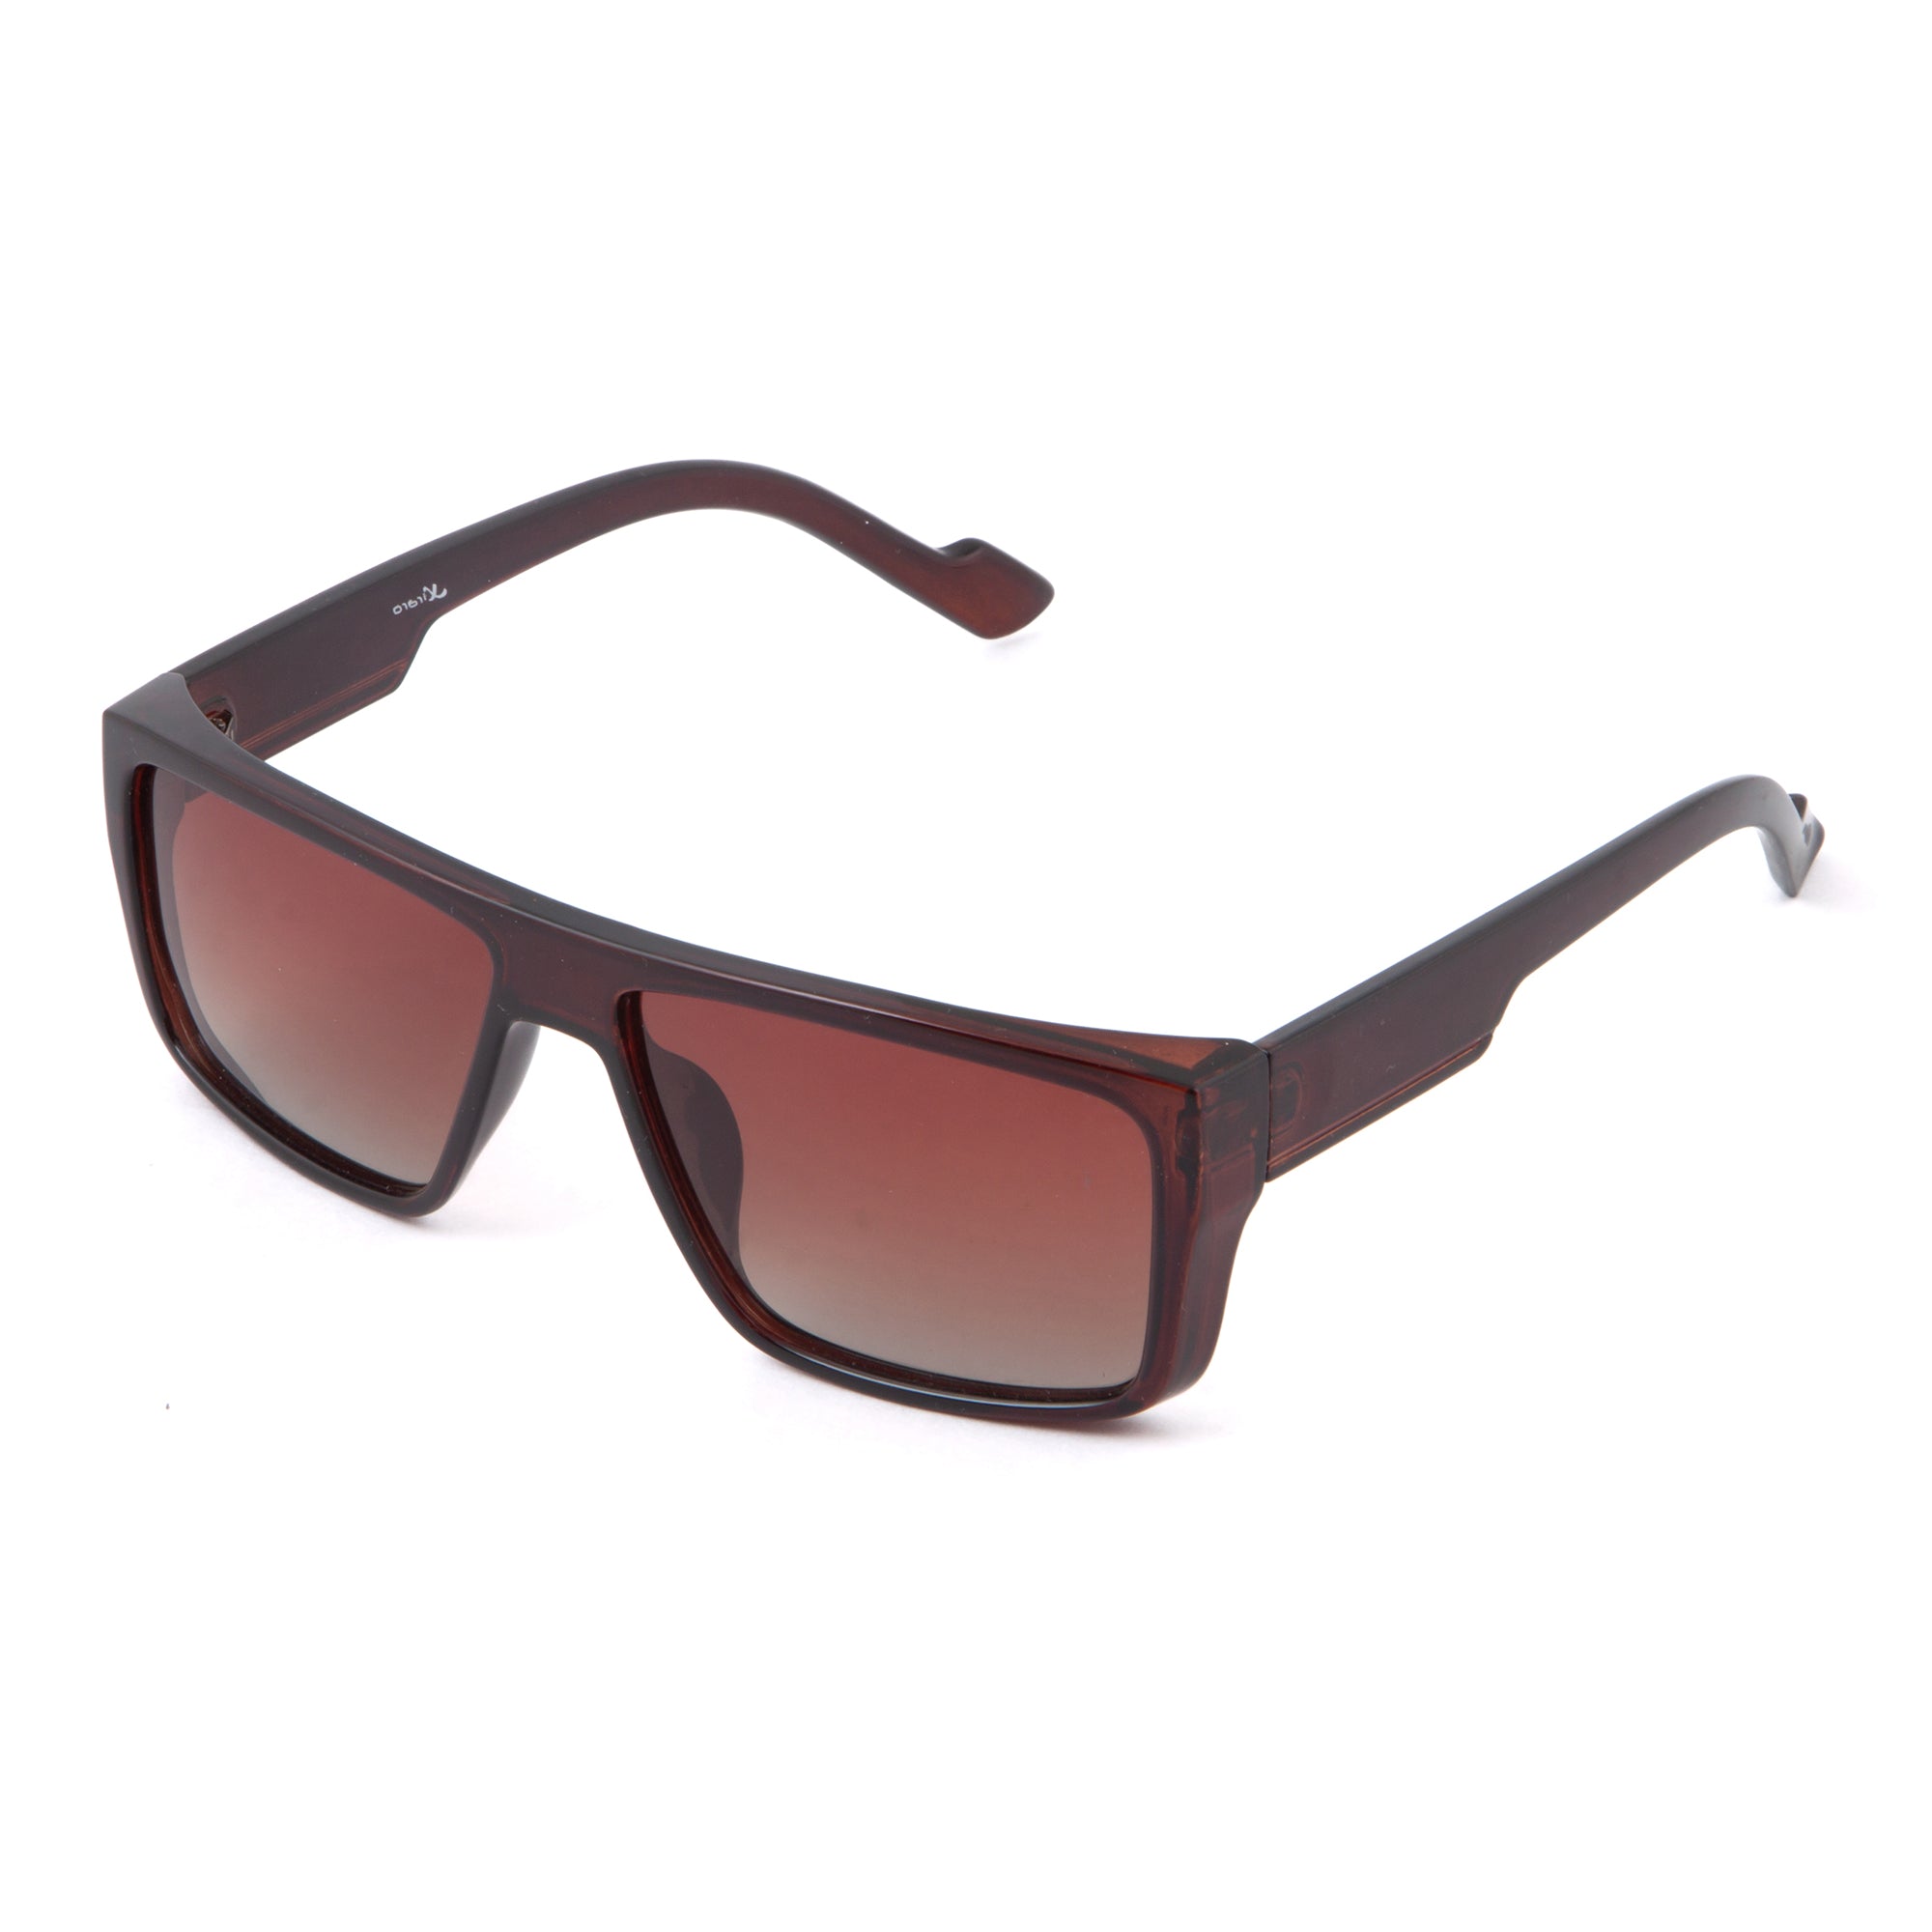 Sunglasses - Buy Best Stylish Sunglasses for Men & Women, Chasma, Cooling Glasses  Online at Best Prices in India